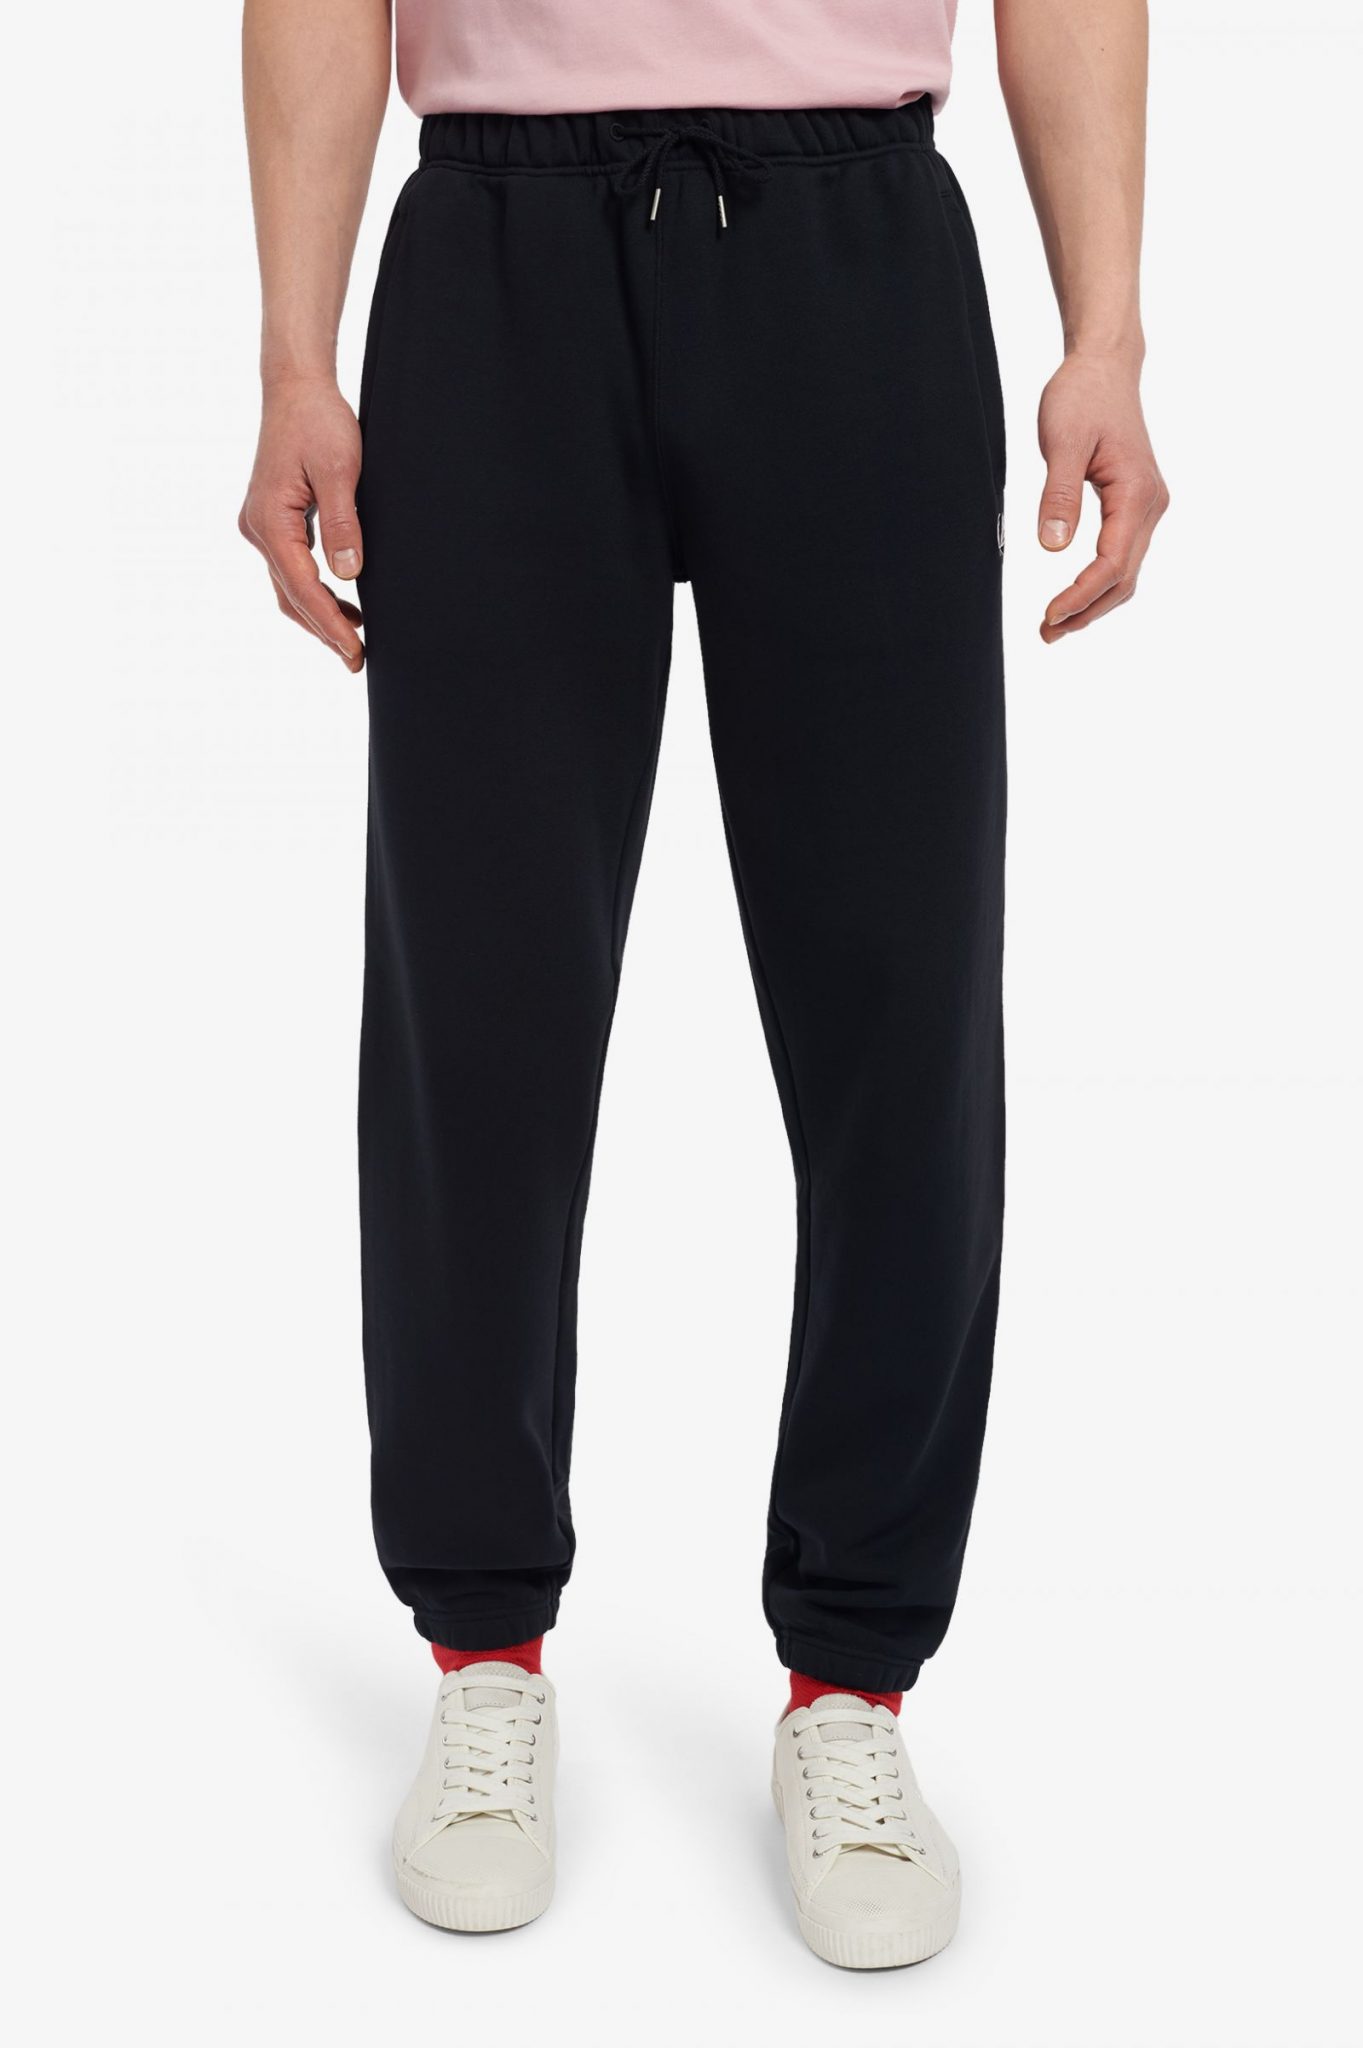 Buy Fred Perry Loopback Sweatpants Black - Scandinavian Fashion Store